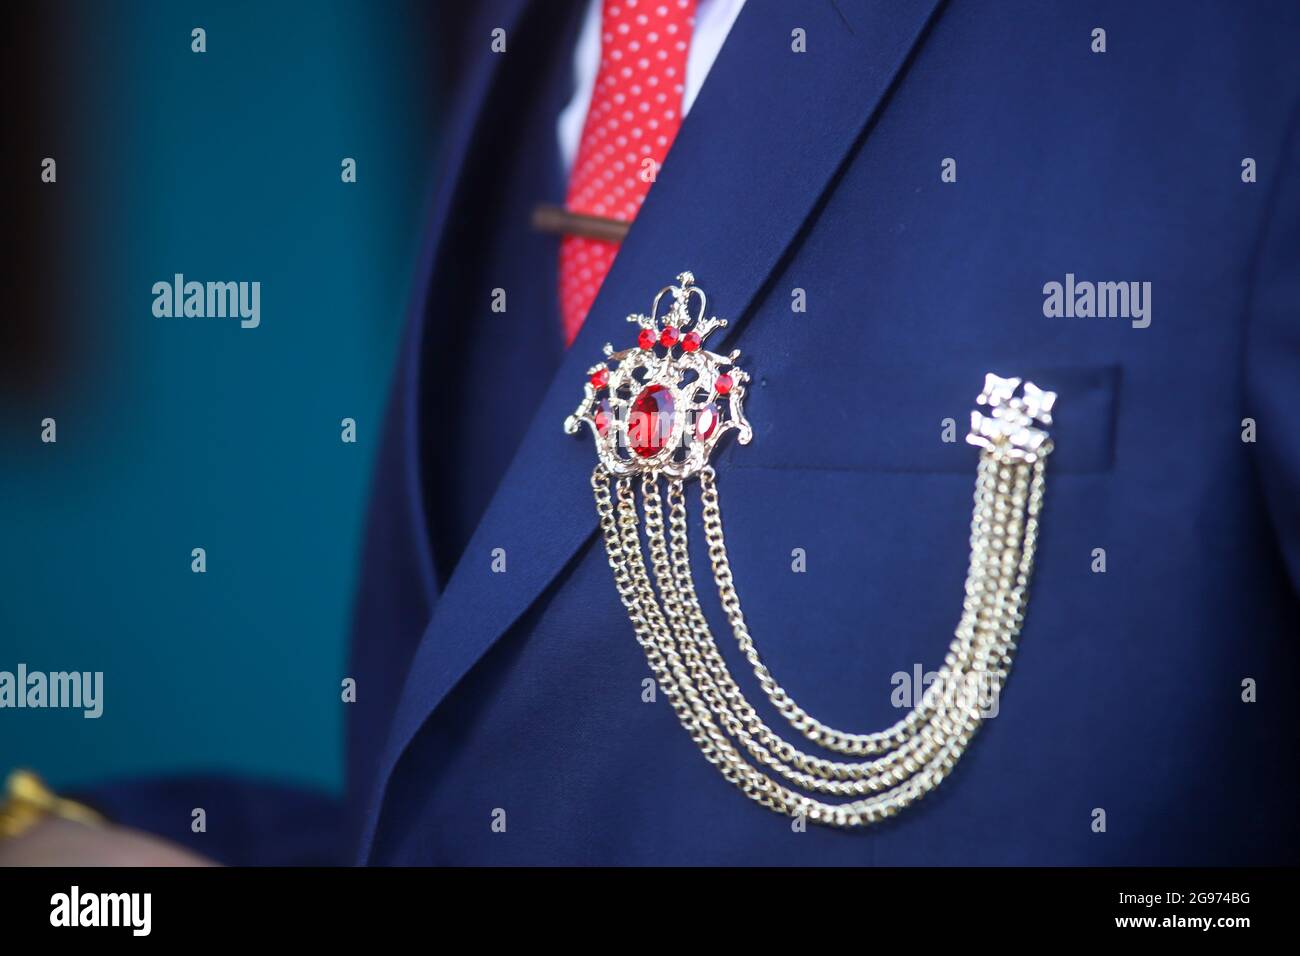 Closeup of a clothing brooch on a blue tuxedo with a red polka dot tie  Stock Photo - Alamy